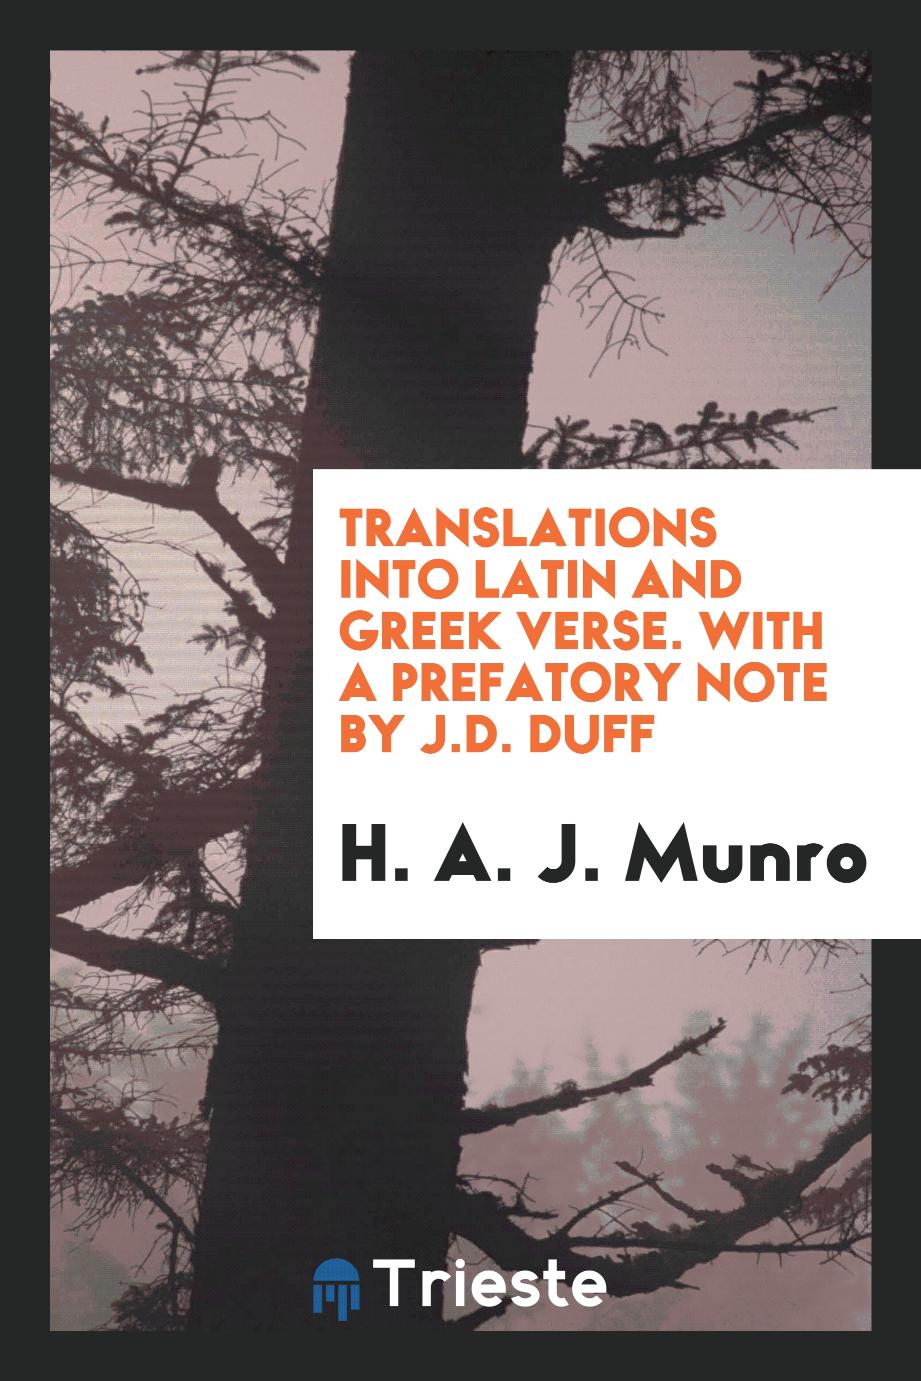 Translations into Latin and Greek verse. With a prefatory note by J.D. Duff